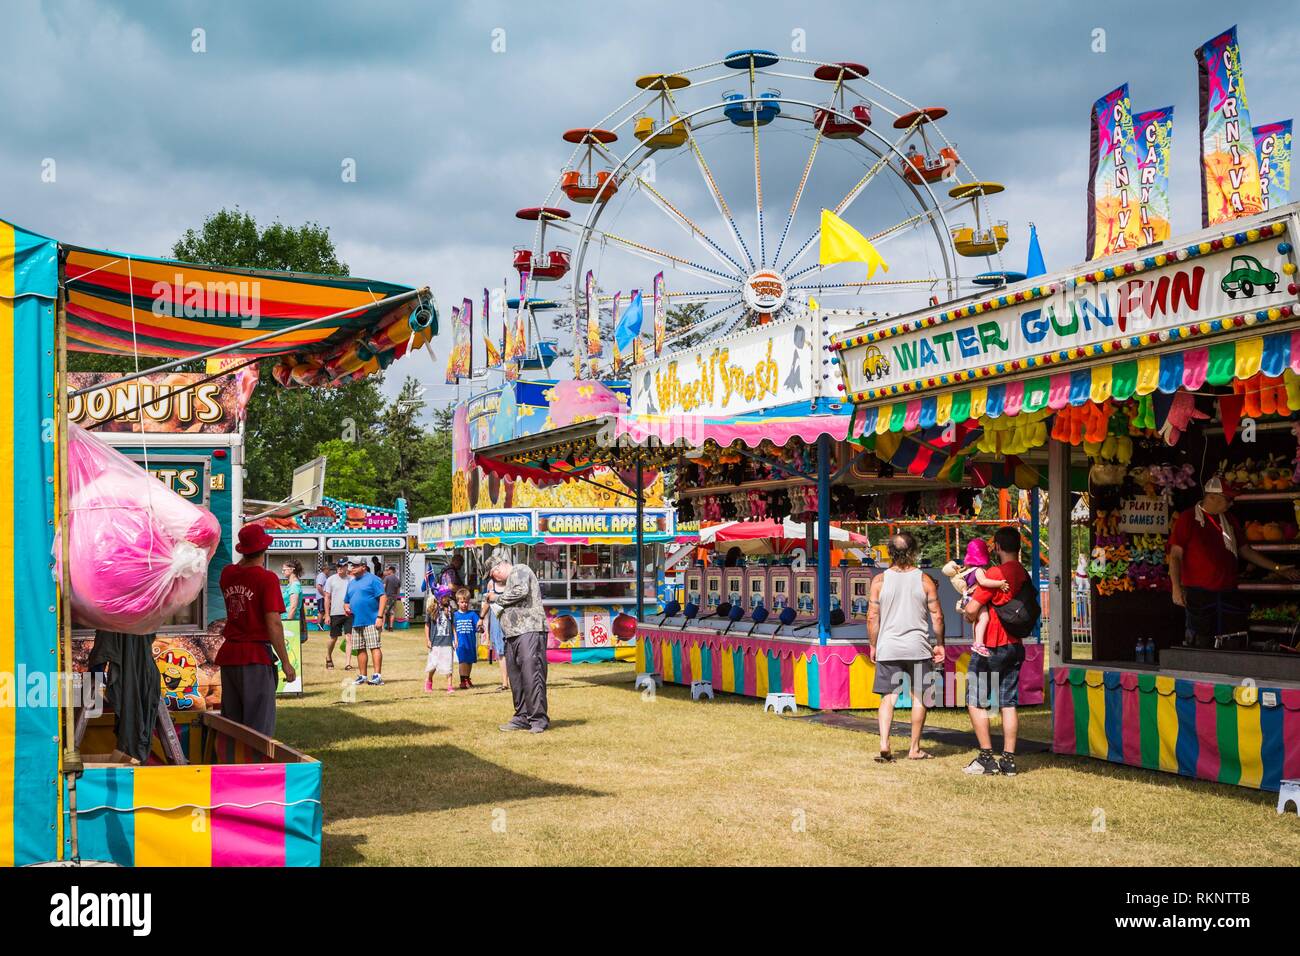 The Wonder Shows midway at the Icelandic Festival in Gimli, Manitoba, Canada. Stock Photo